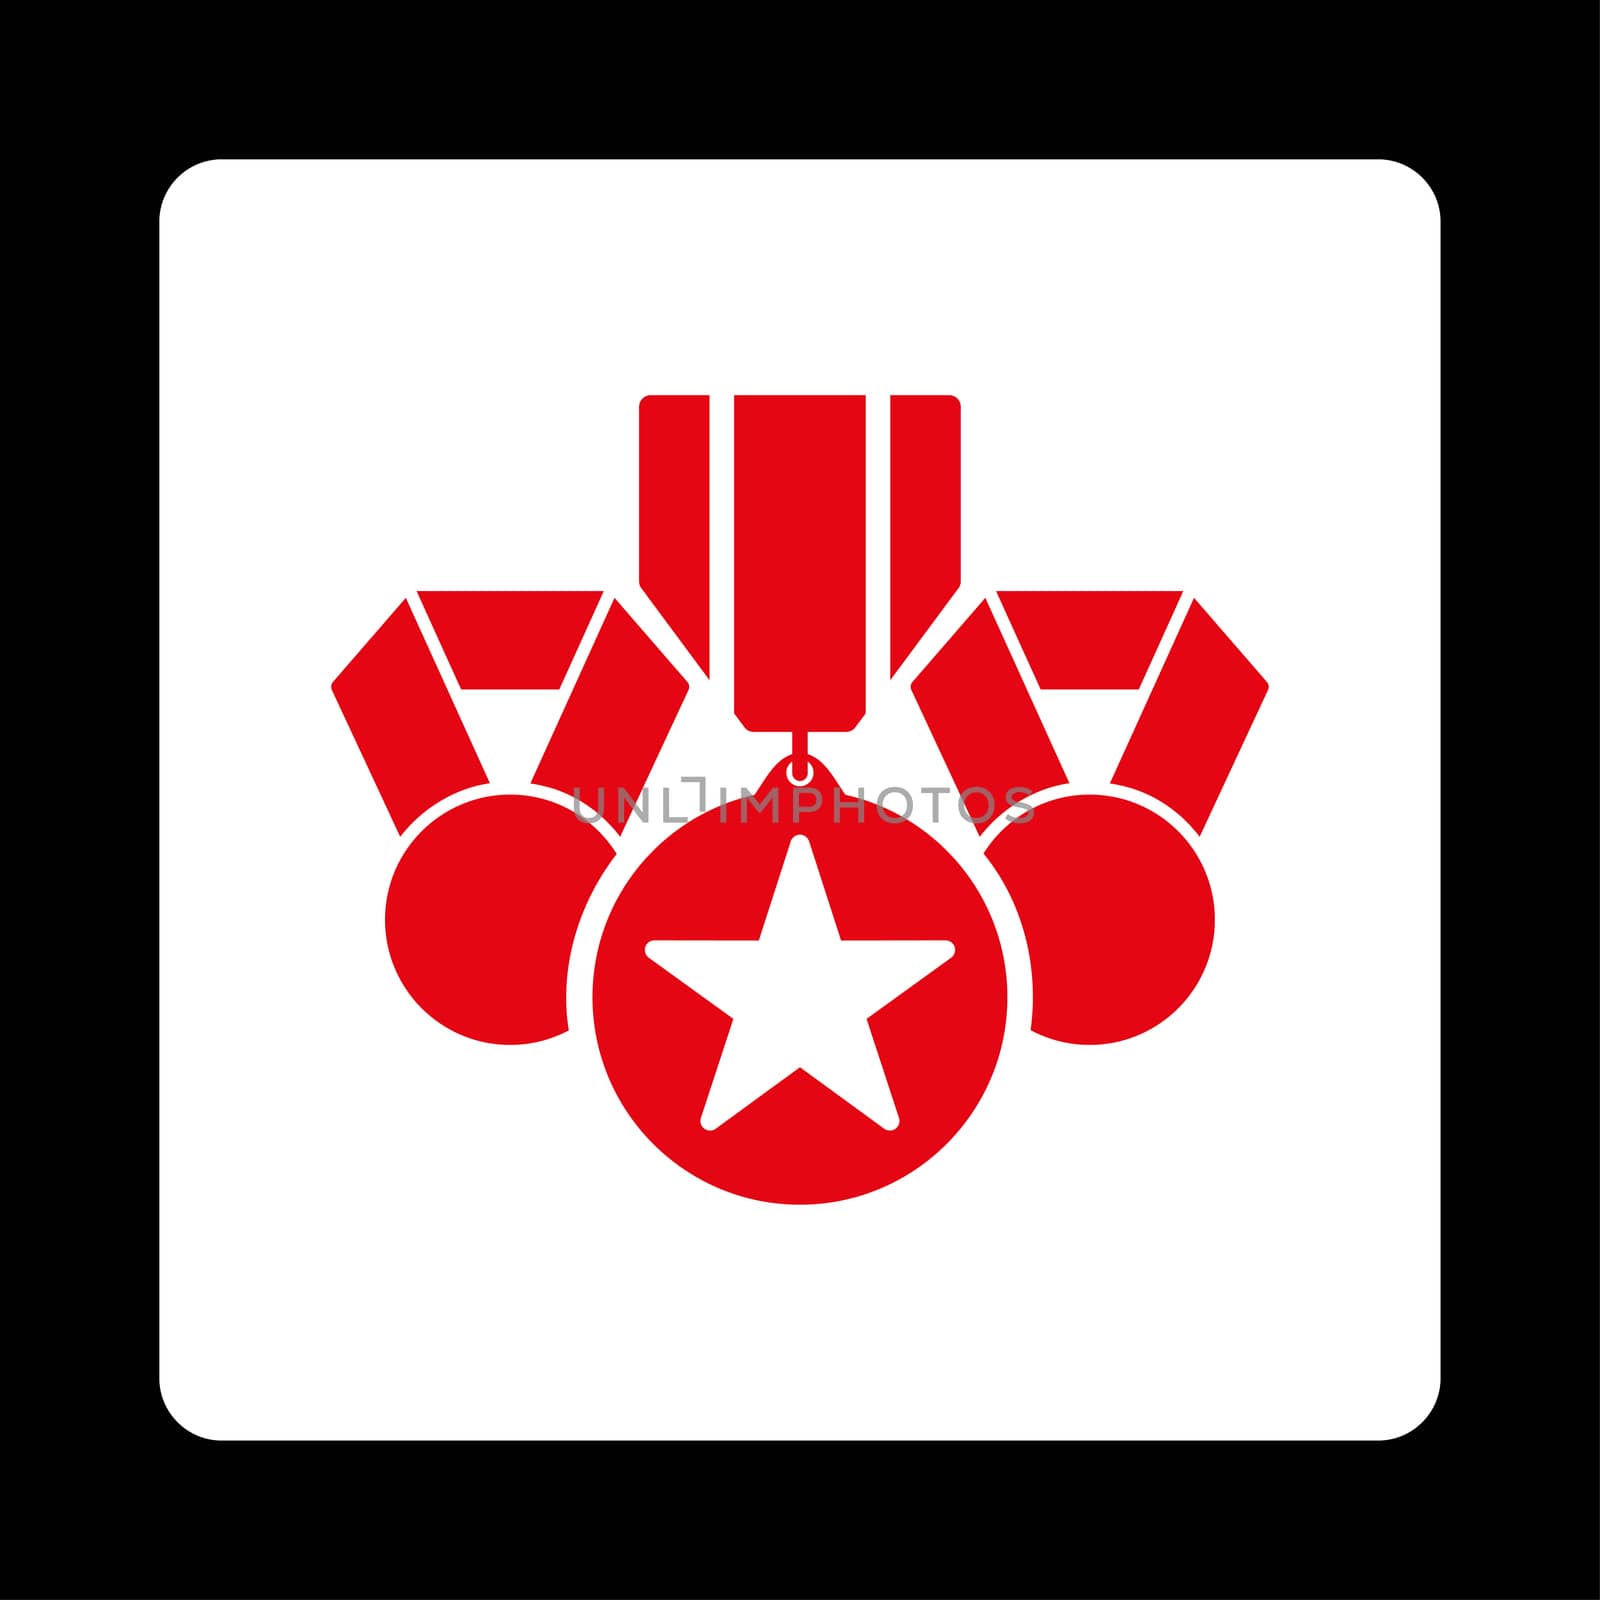 Awards icon from Award Buttons OverColor Set. Icon style is red and white colors, flat rounded square button, black background.